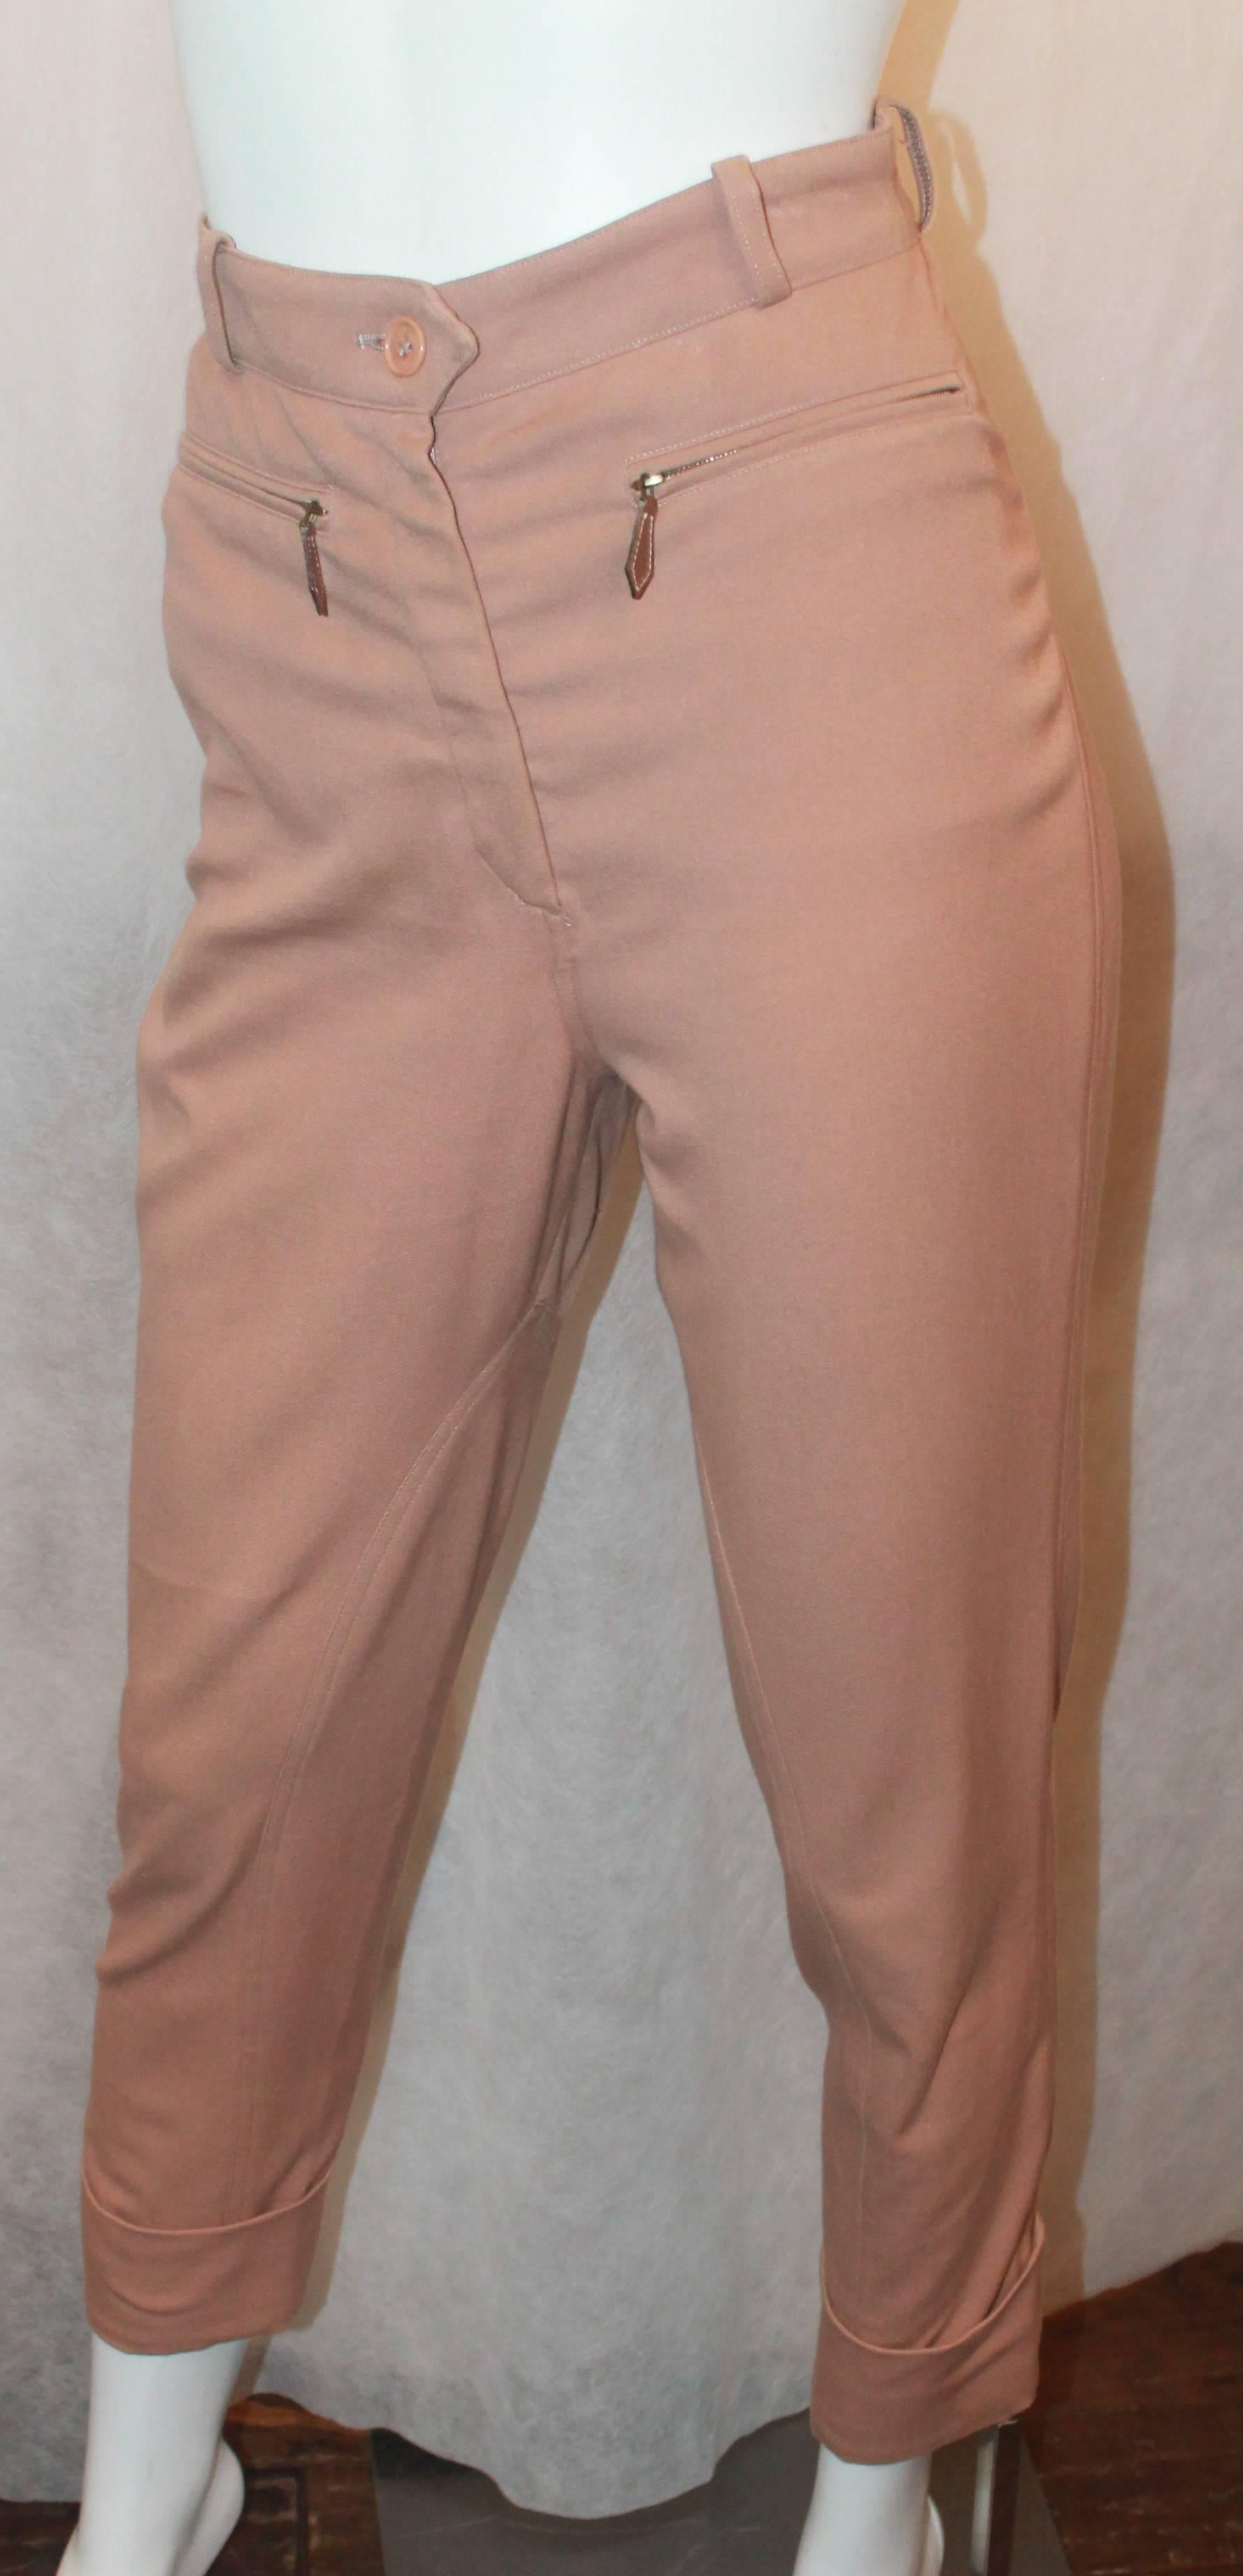 Hermes Vintage Mauve Riding Pants with Leather Detail - 36 - 1990's. These pants are in good vintage condition with wear consistent with its age. They have a cuffed bottom and leather zips. There are 2 front pockets and they are high waisted pants.